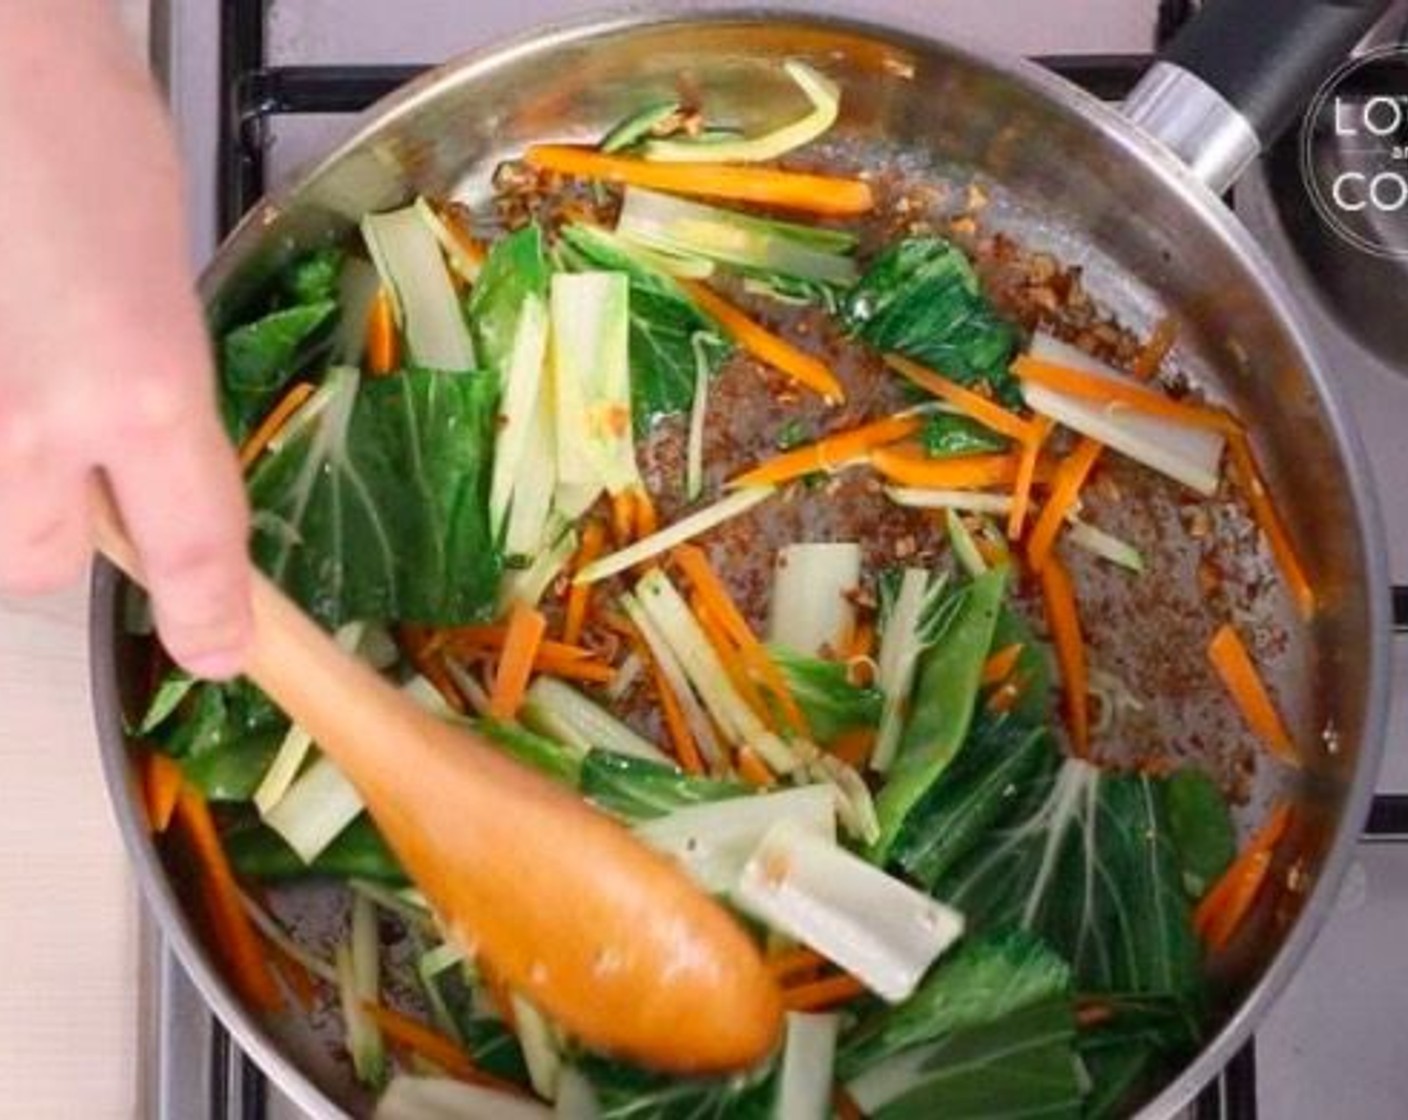 step 7 In the same pan, add Carrot (1), Zucchini (3), Bok Choy (2), and Snow Peas (10).